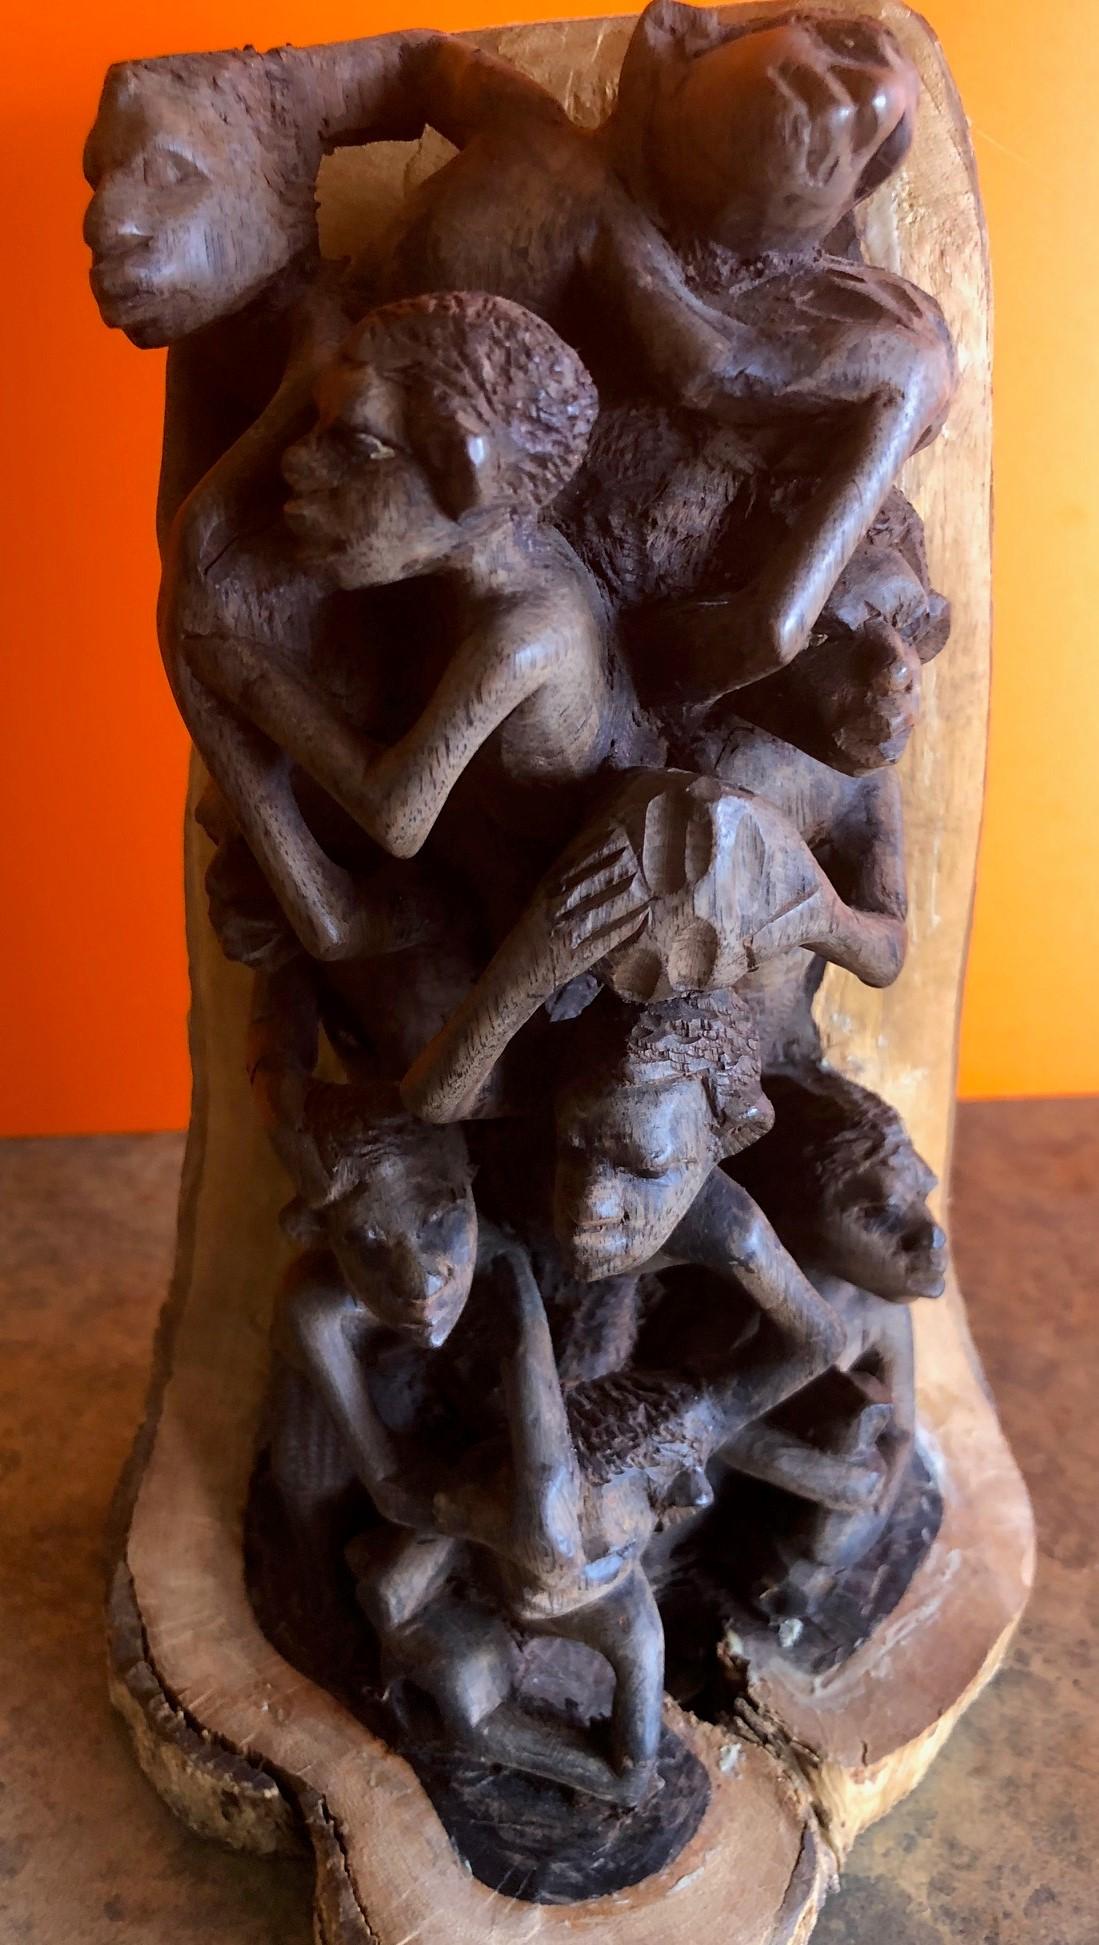 A unique African carving of eight villagers at work and play. The piece is hand-carved into a tree branch that has dark wood on the inner layers and light wood on the outer layers. It is truly a unique and fabulous piece of art. The backside of the